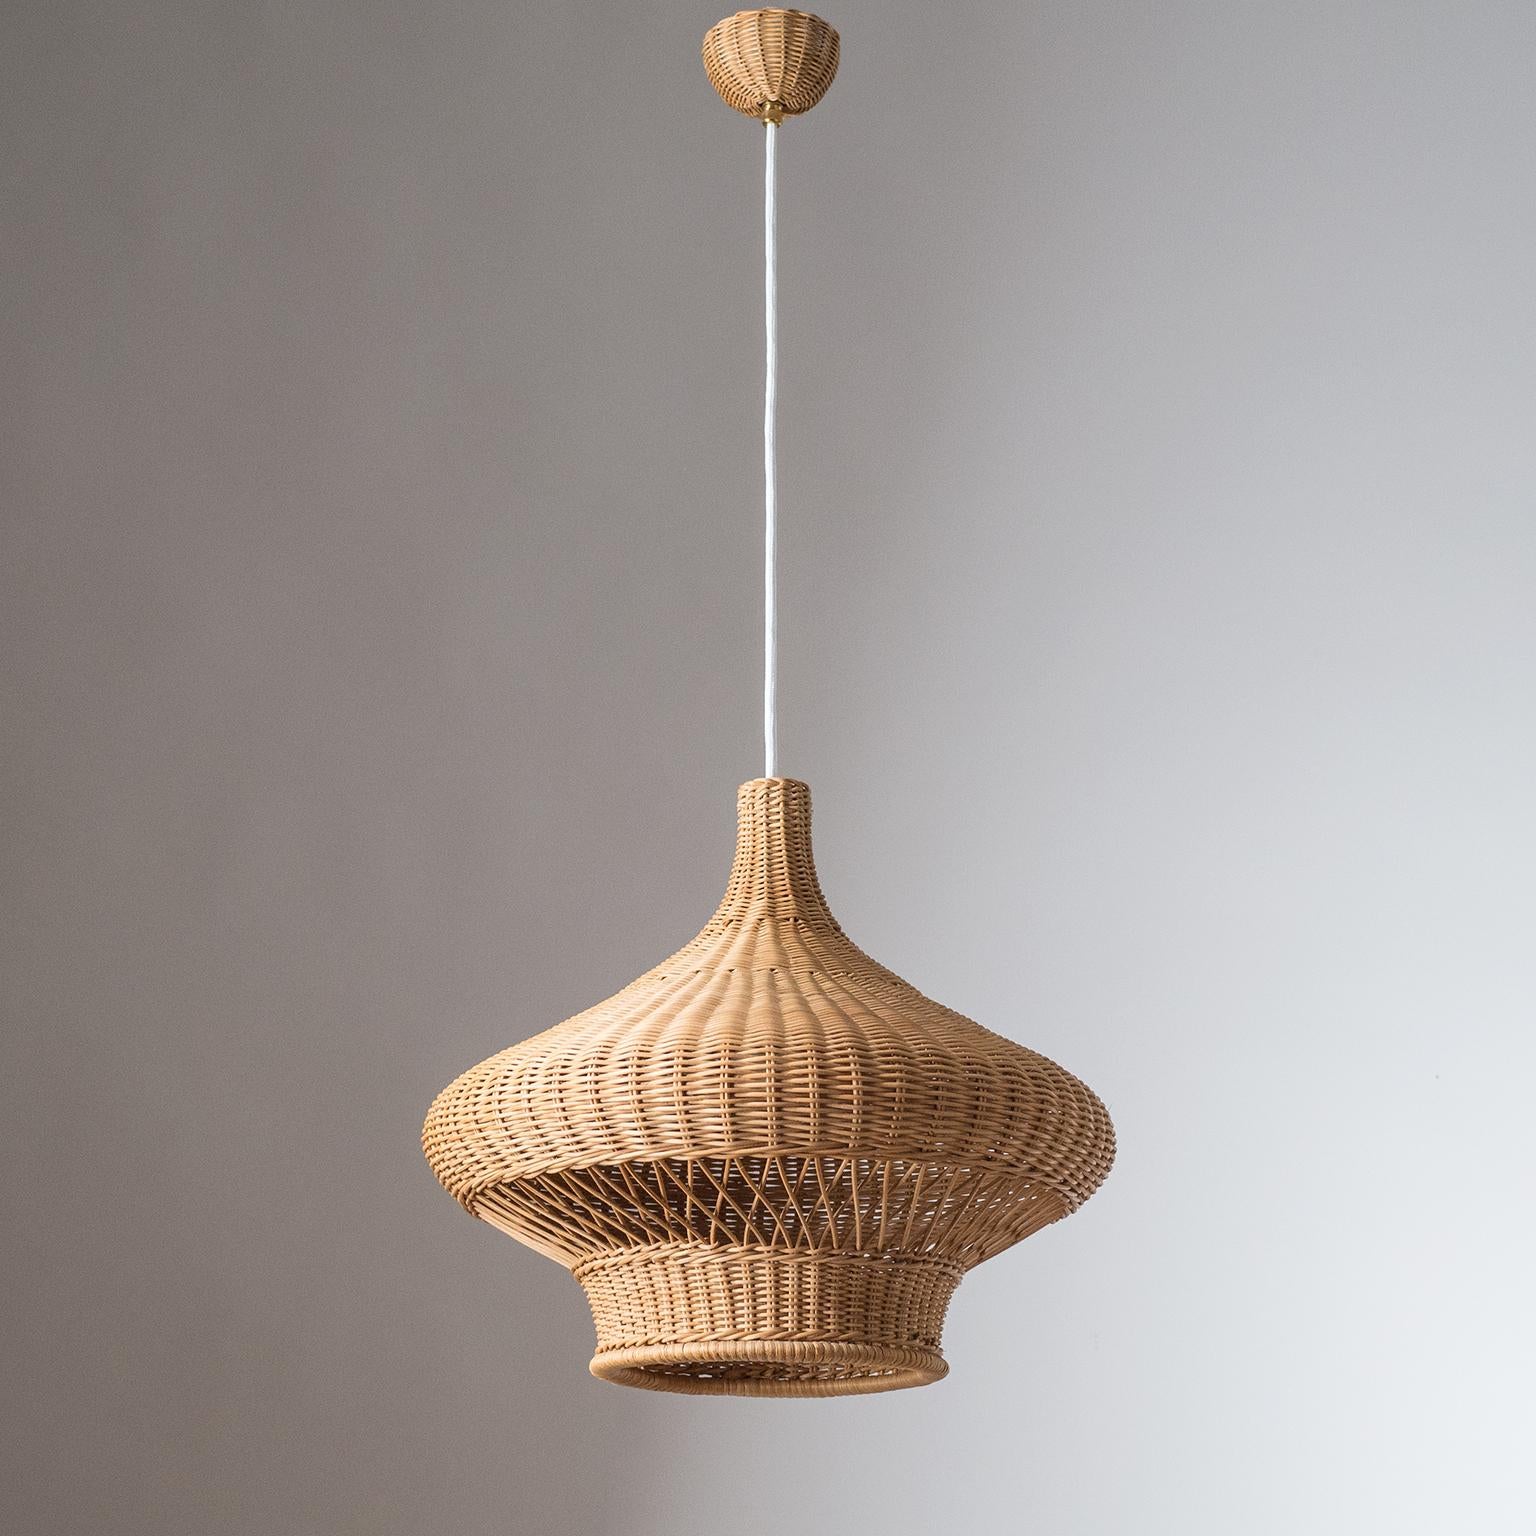 Rare intricately woven rattan or wicker pendant from the 1960s. One original E27 socket with new fabric wiring. Height of the body circa 14inches/36cm. Drop height adjustable up to 57inches/145cm.